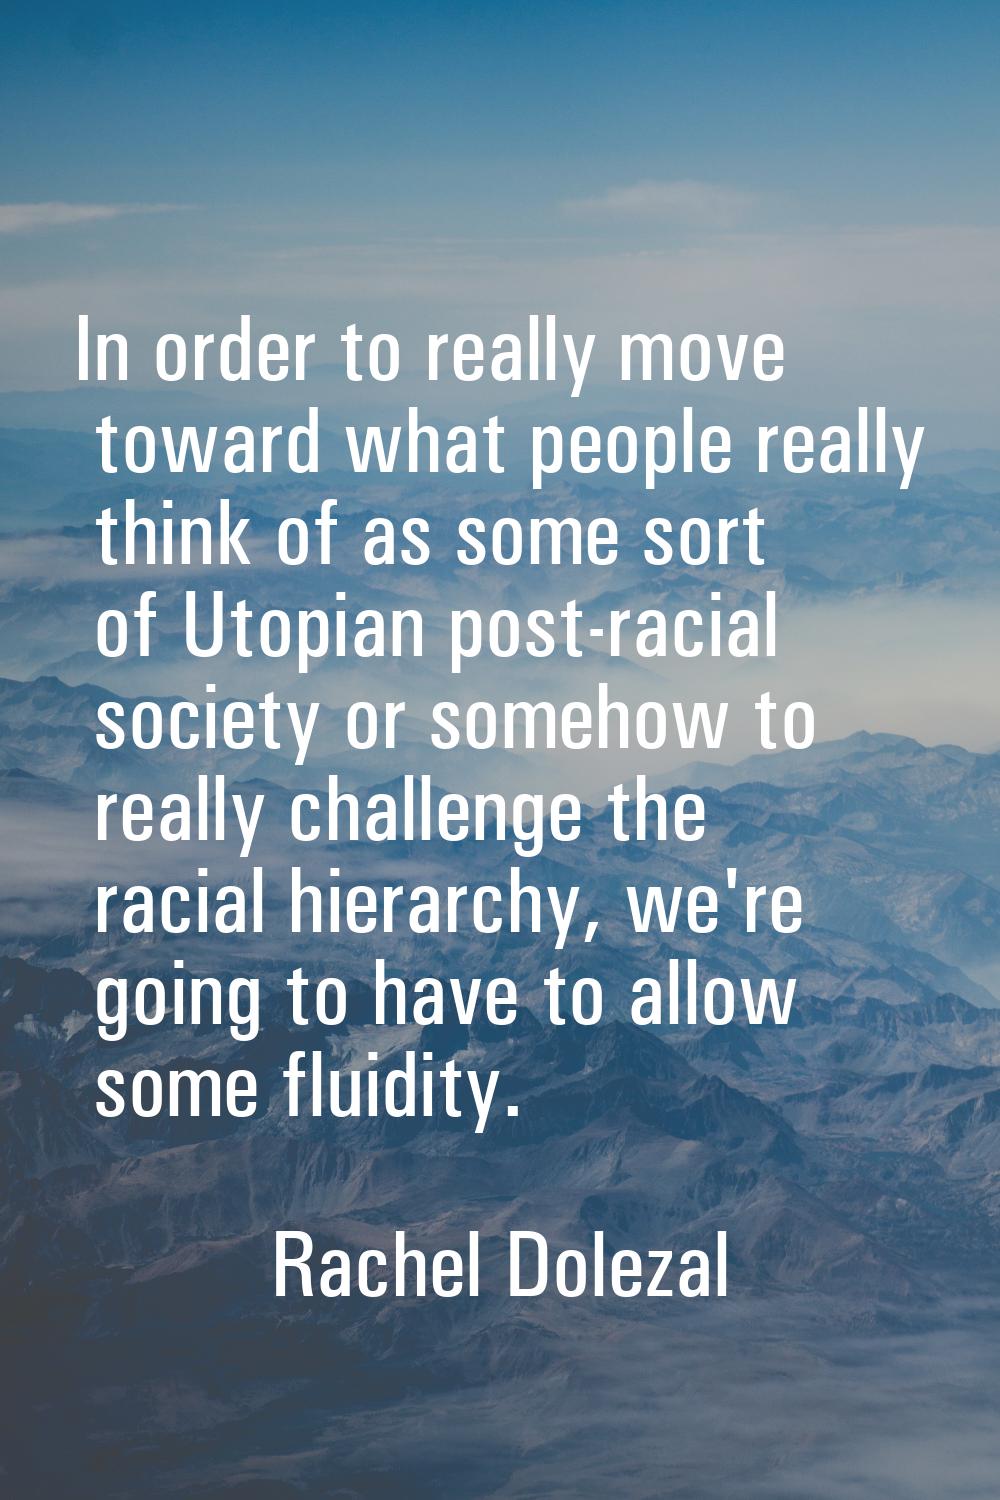 In order to really move toward what people really think of as some sort of Utopian post-racial soci